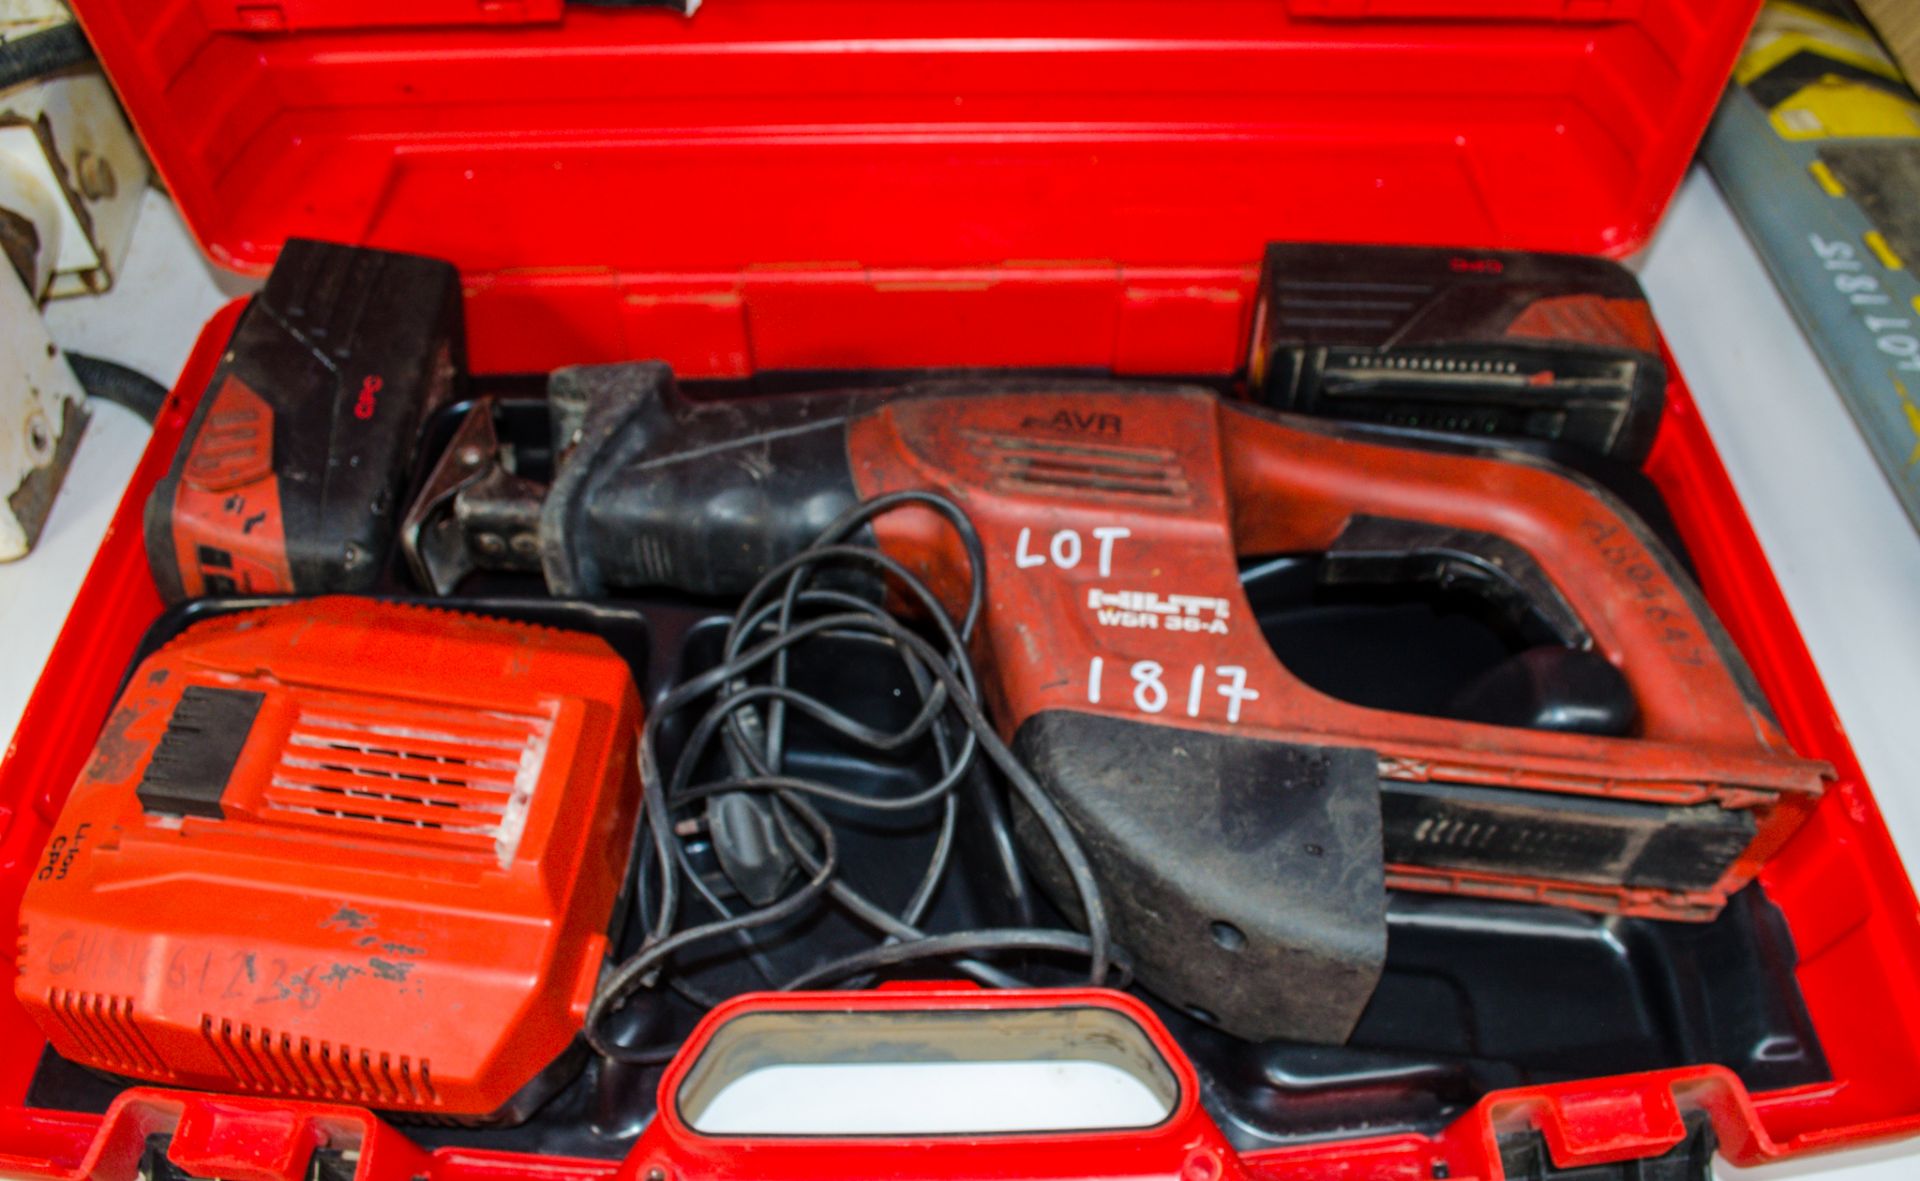 Hilti WSR 36-A 36v cordless reciprocating saw c/w 2 - batteries, charger & carry case A804647